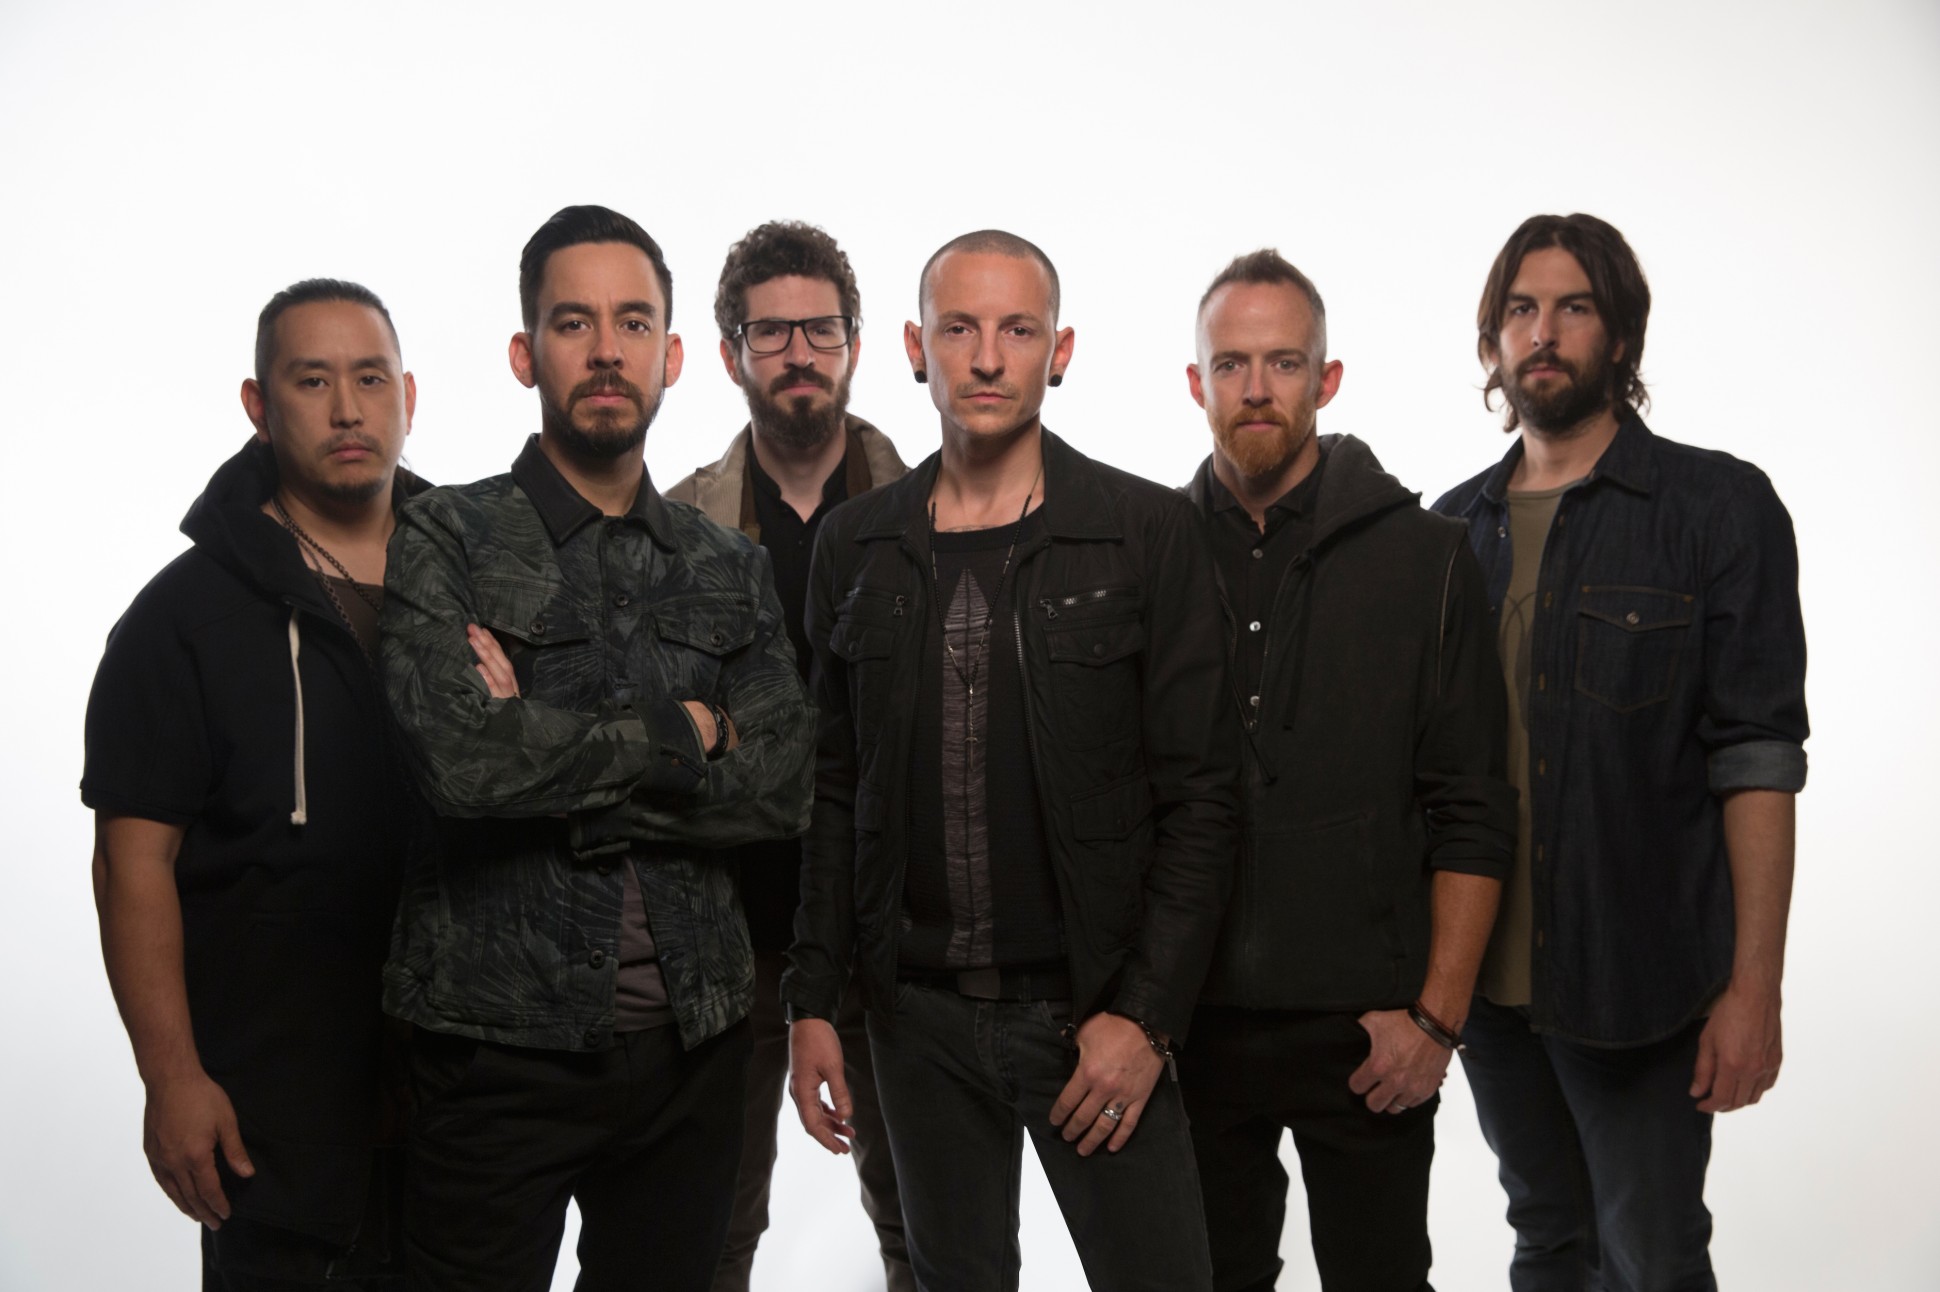 linkin park given up drum track